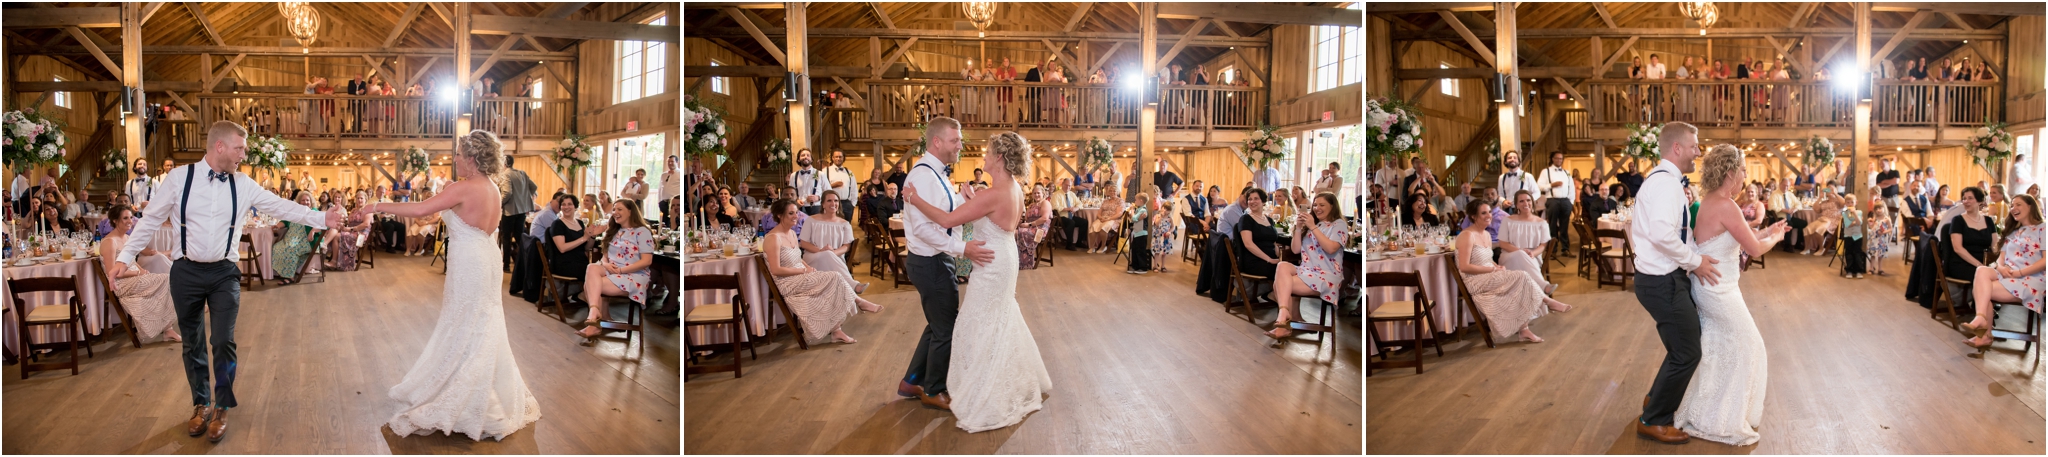 Lindley Farmstead at Chatham Hills | Sarah and Rachel Wedding Photographers | Westfield, Indiana wedding | fun first dance as husband and wife